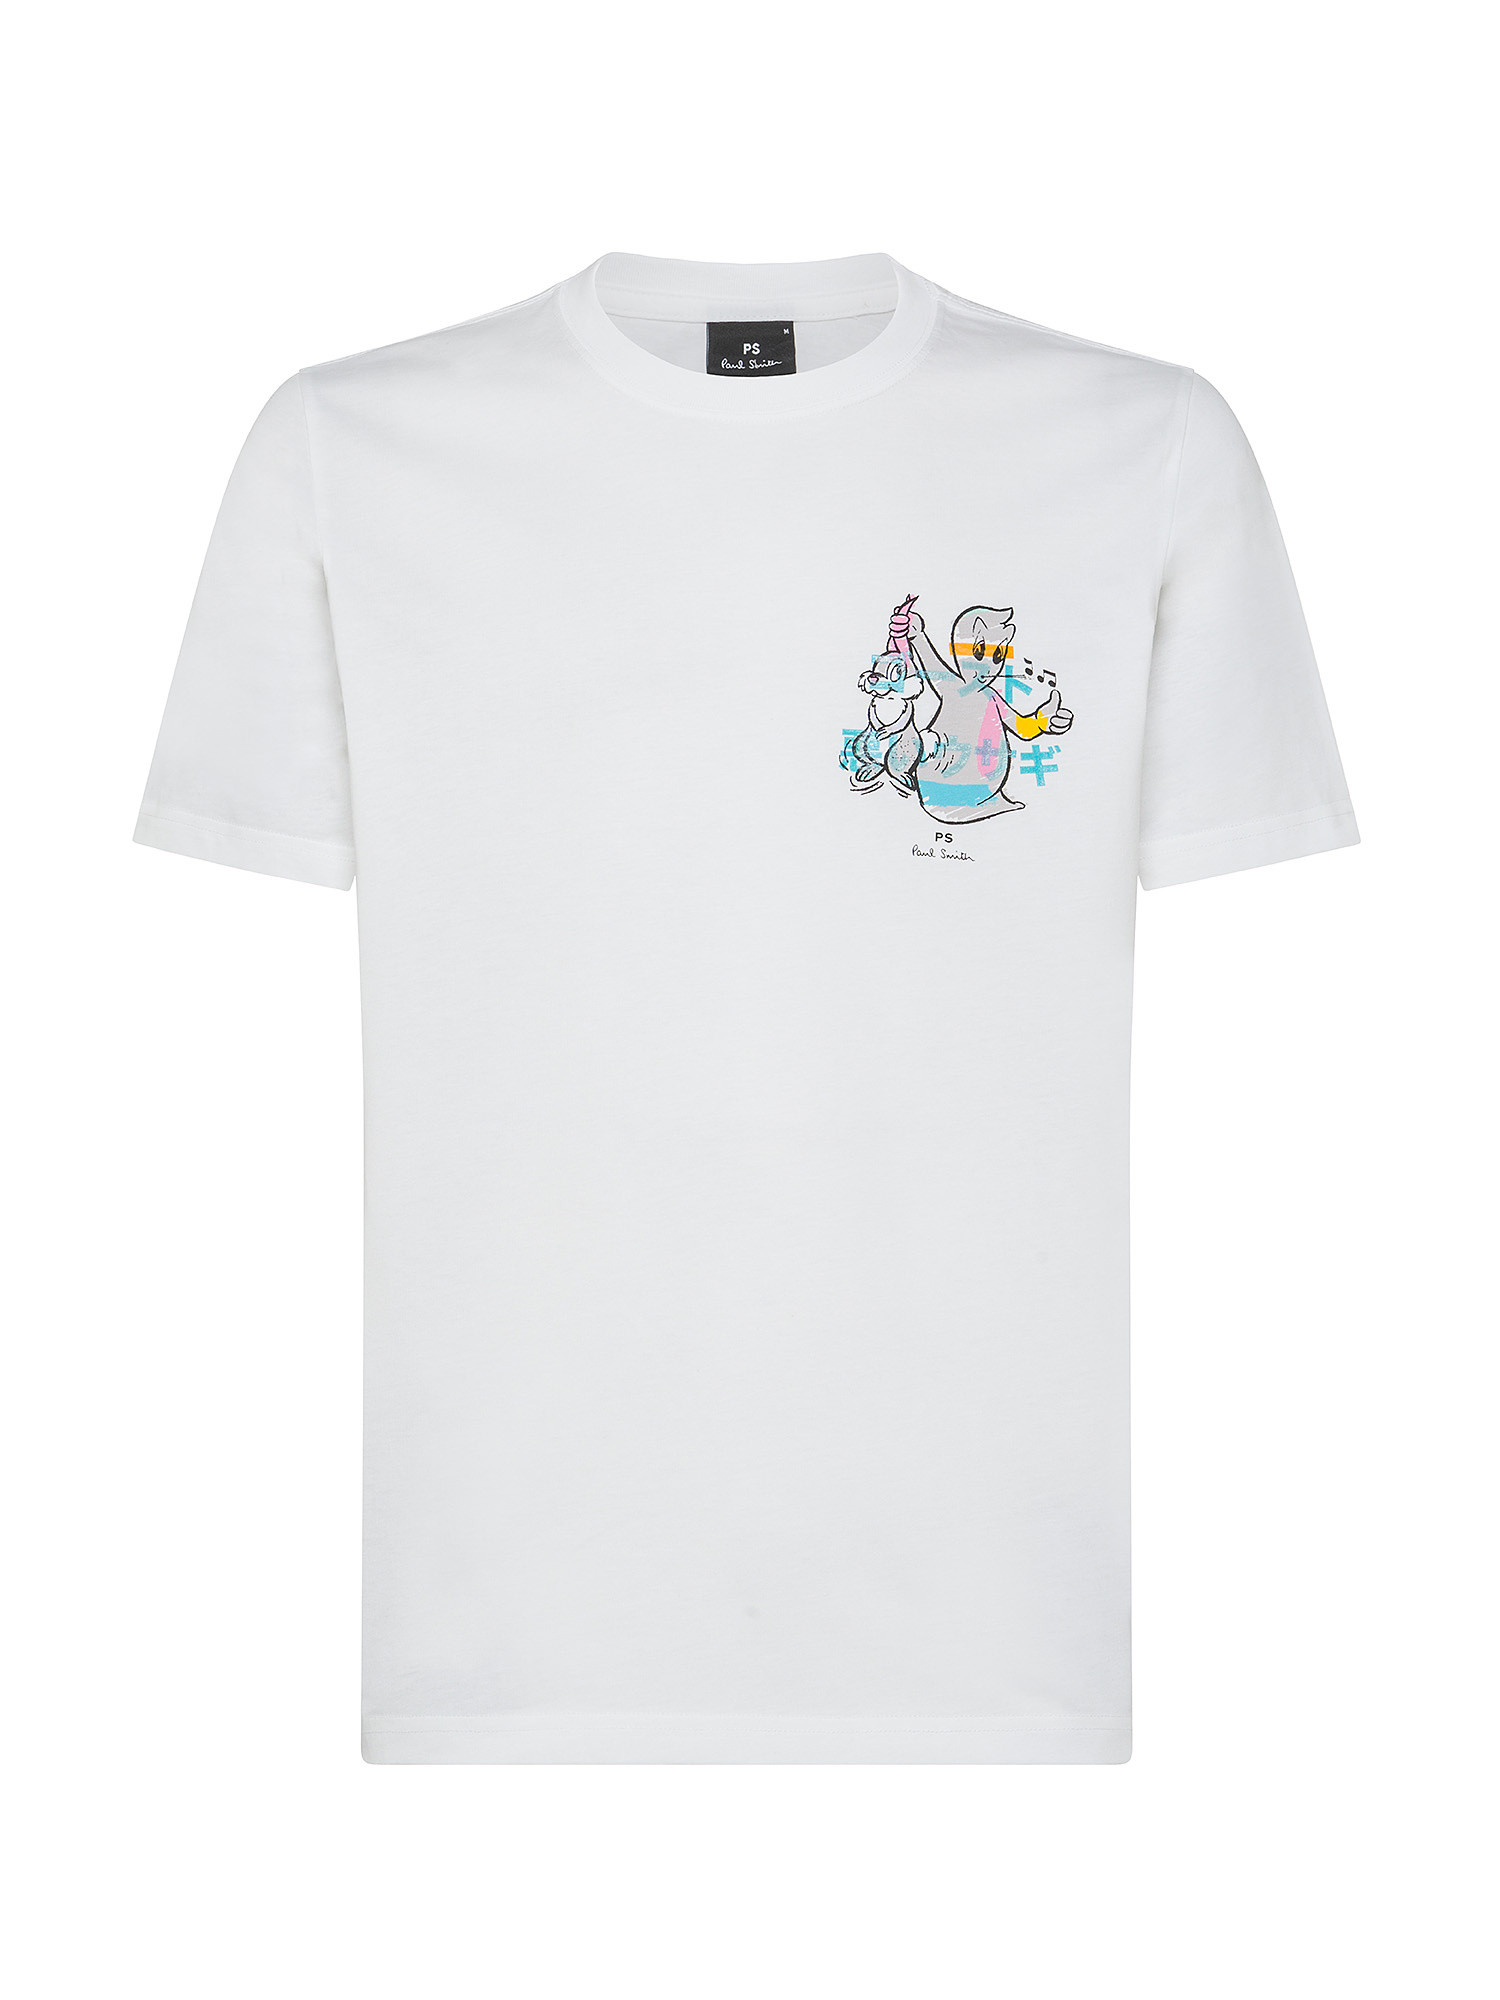 Paul Smith Ghost Print Cotton T-Shirt, White, large image number 0